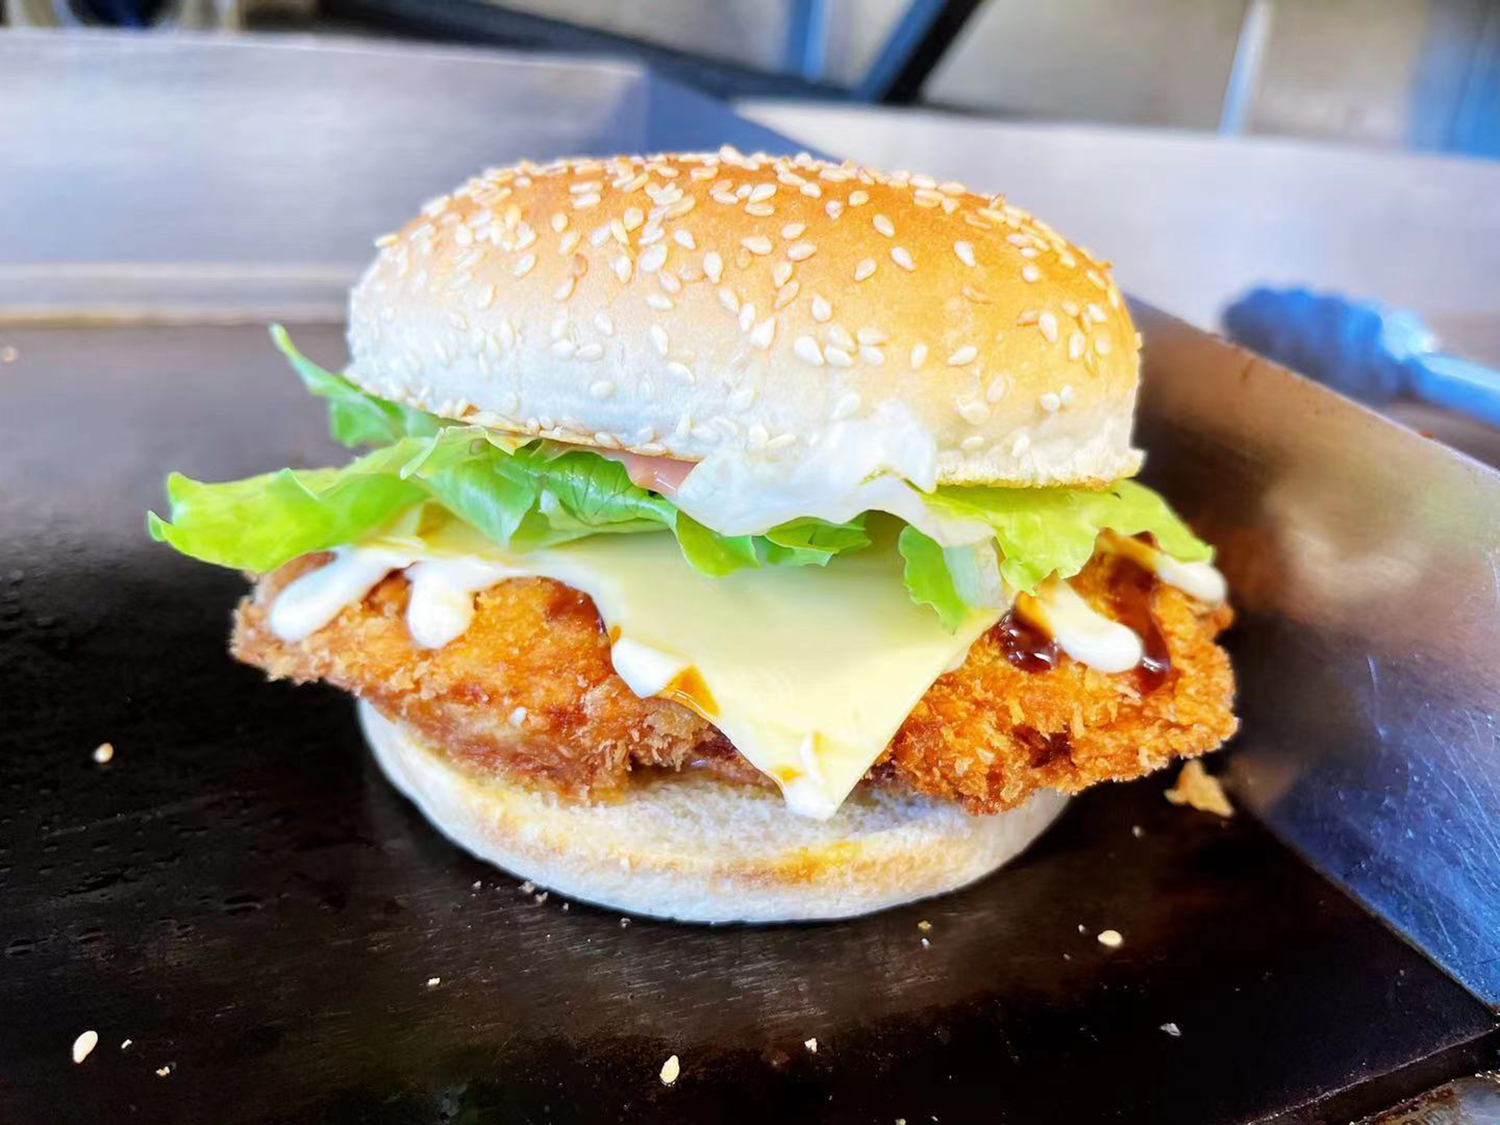 Small Crumbed Chicken Burger